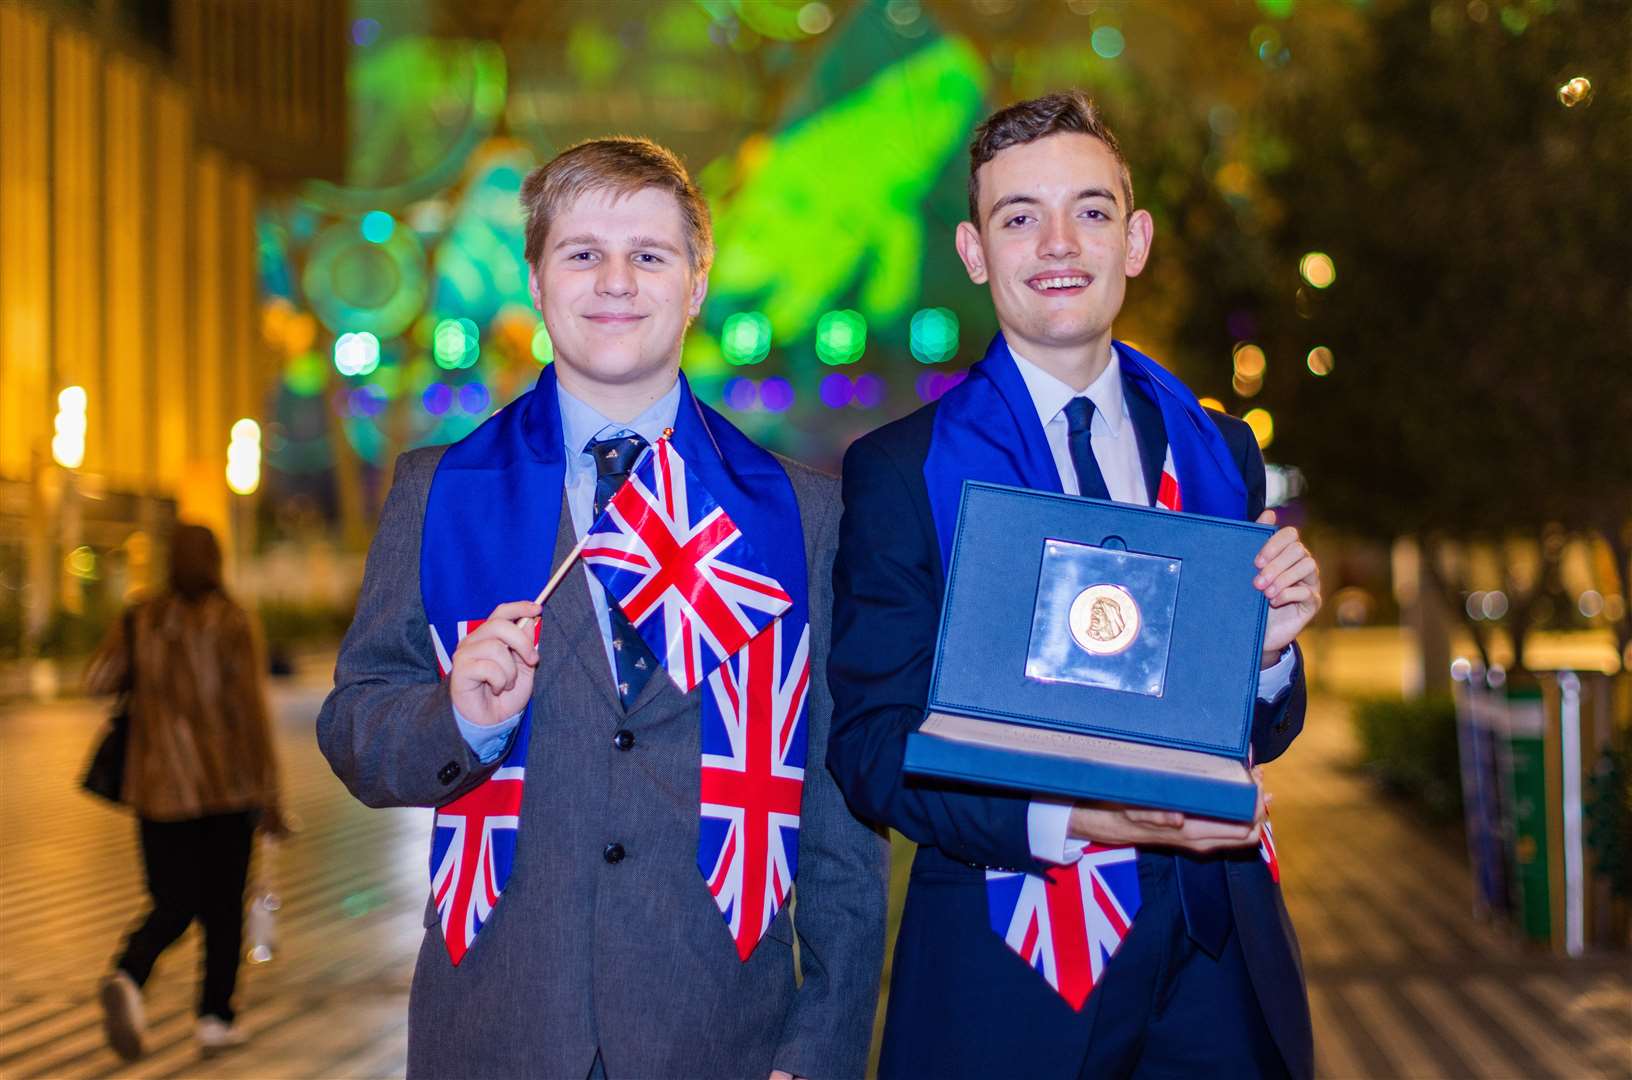 James and Callum from Northfleet Technology College won the Zayed Sustainability Prize in Dubai